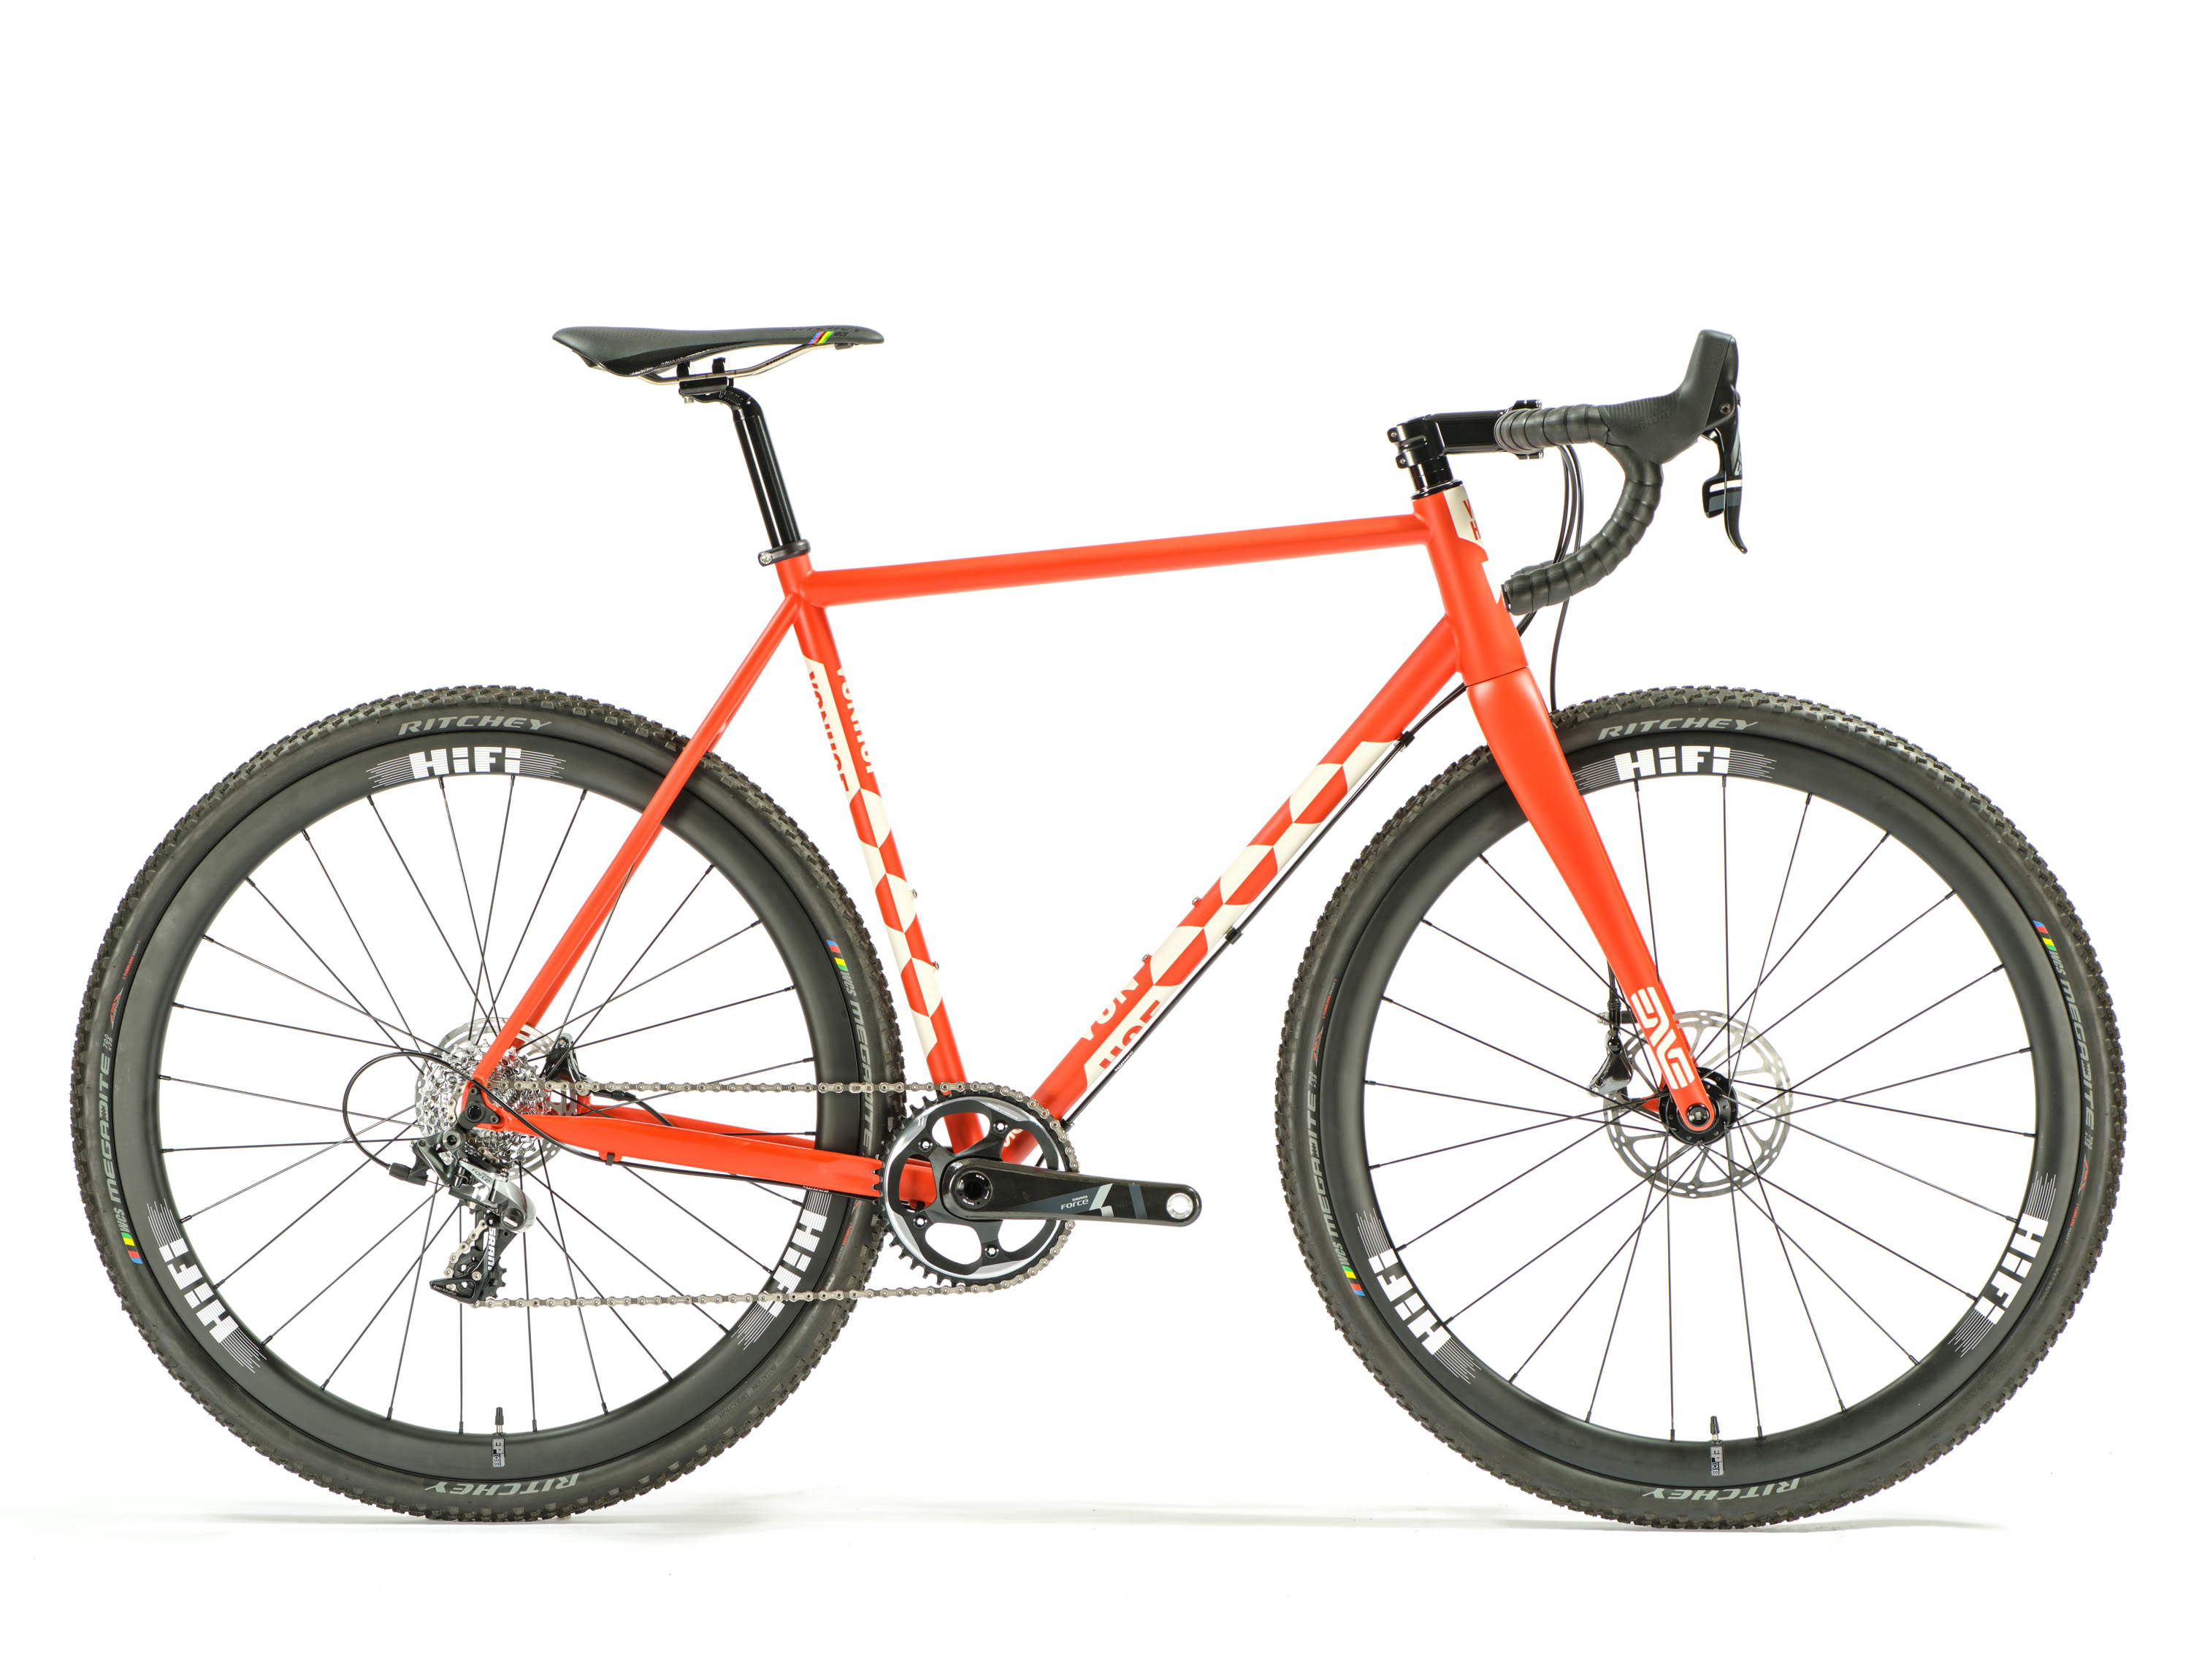 VonHof Steel ACX is a U.S. made cross bike that's ready for the off season